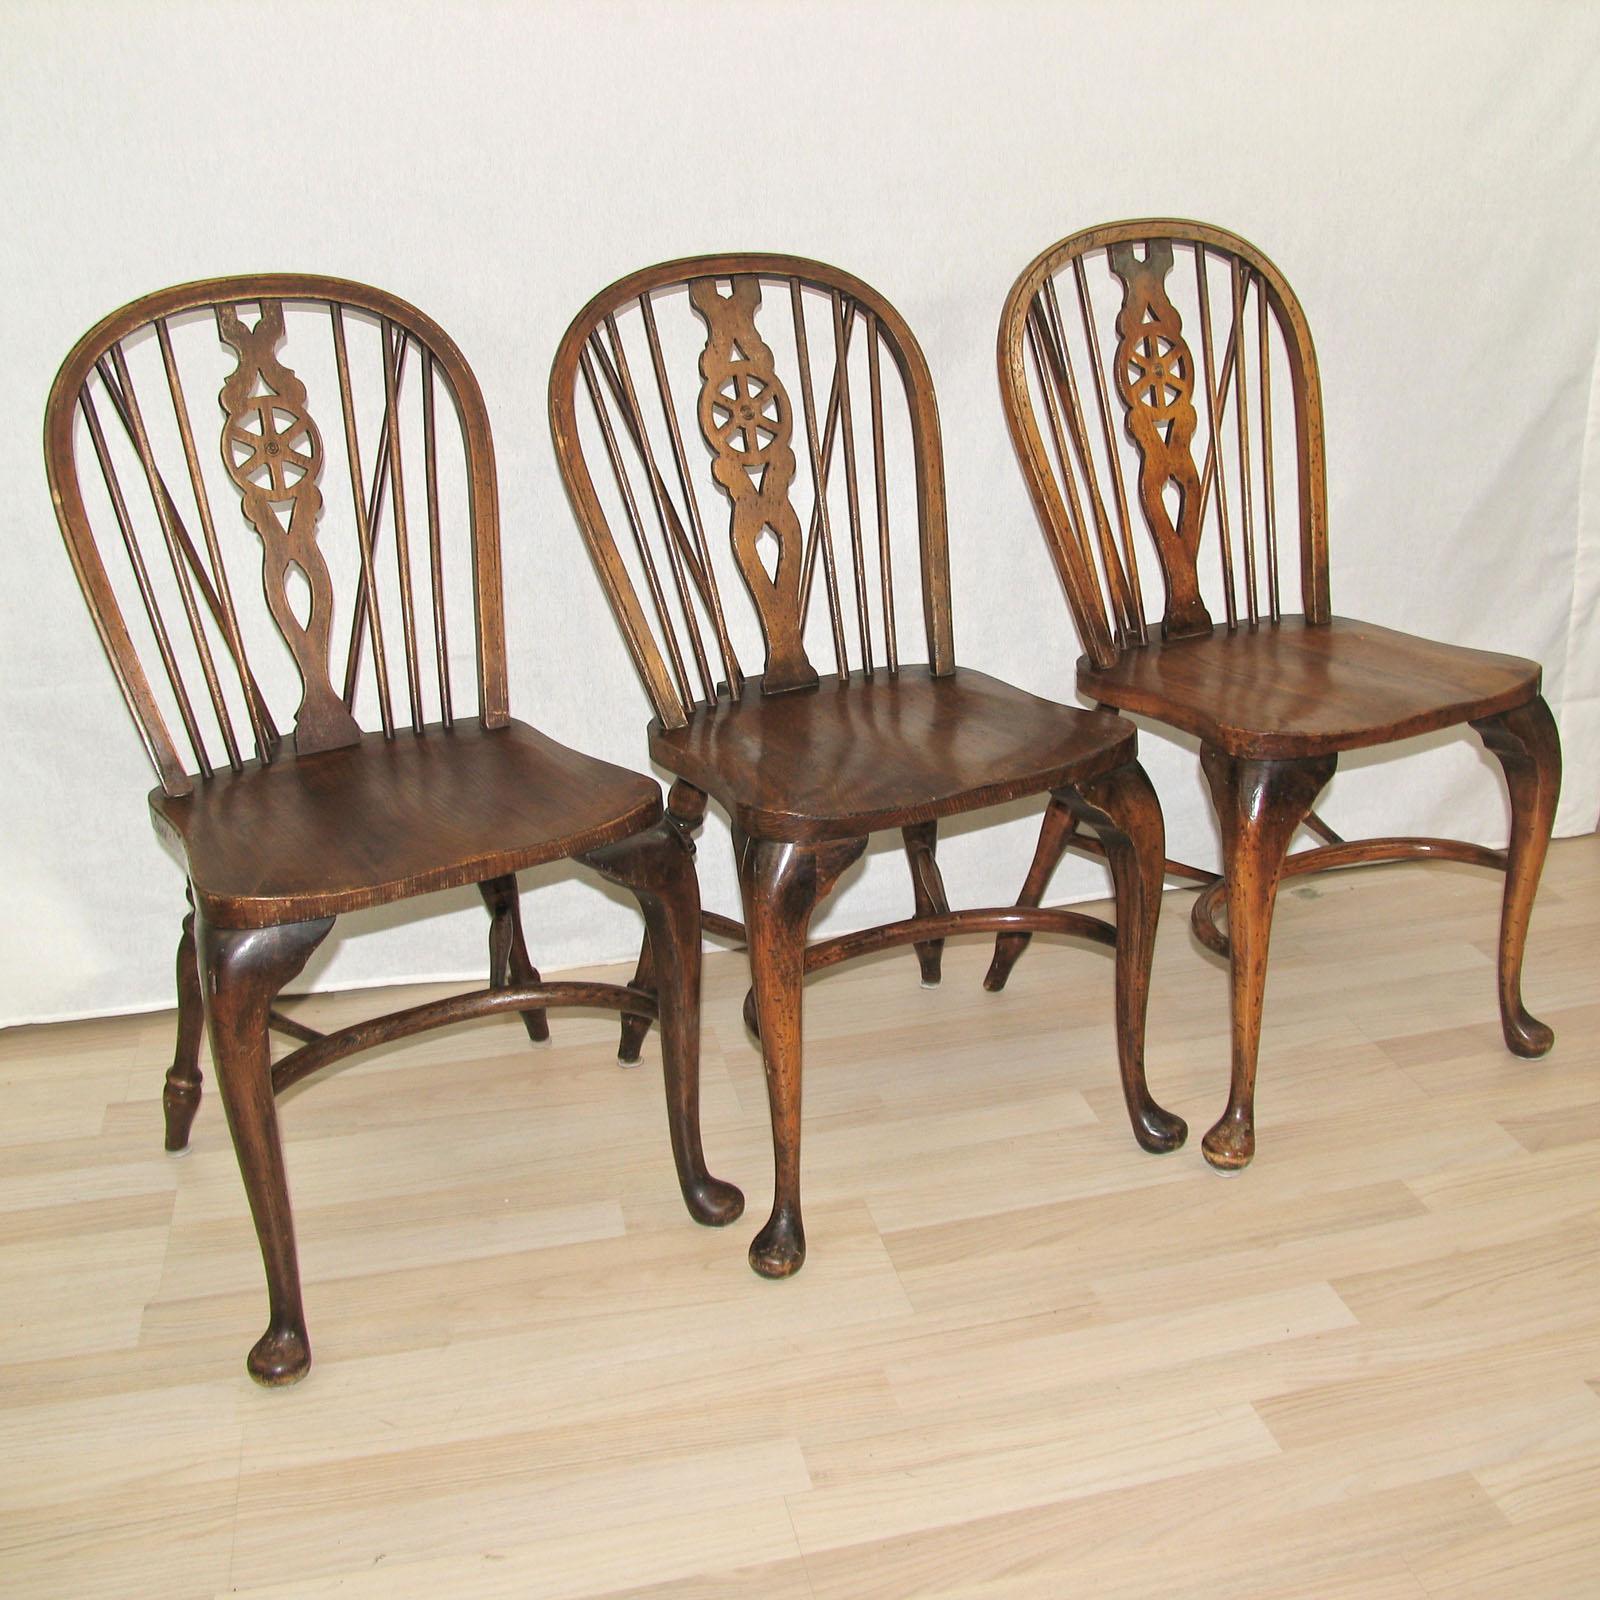 Set of 3 ash & beech wheelback Windsor chairs with cabriole leg. Backs and legs made of beech and the seats made of ash. The front legs are of cabriole design, back legs turned, supported with a crinoline stretcher. Original label under the seat